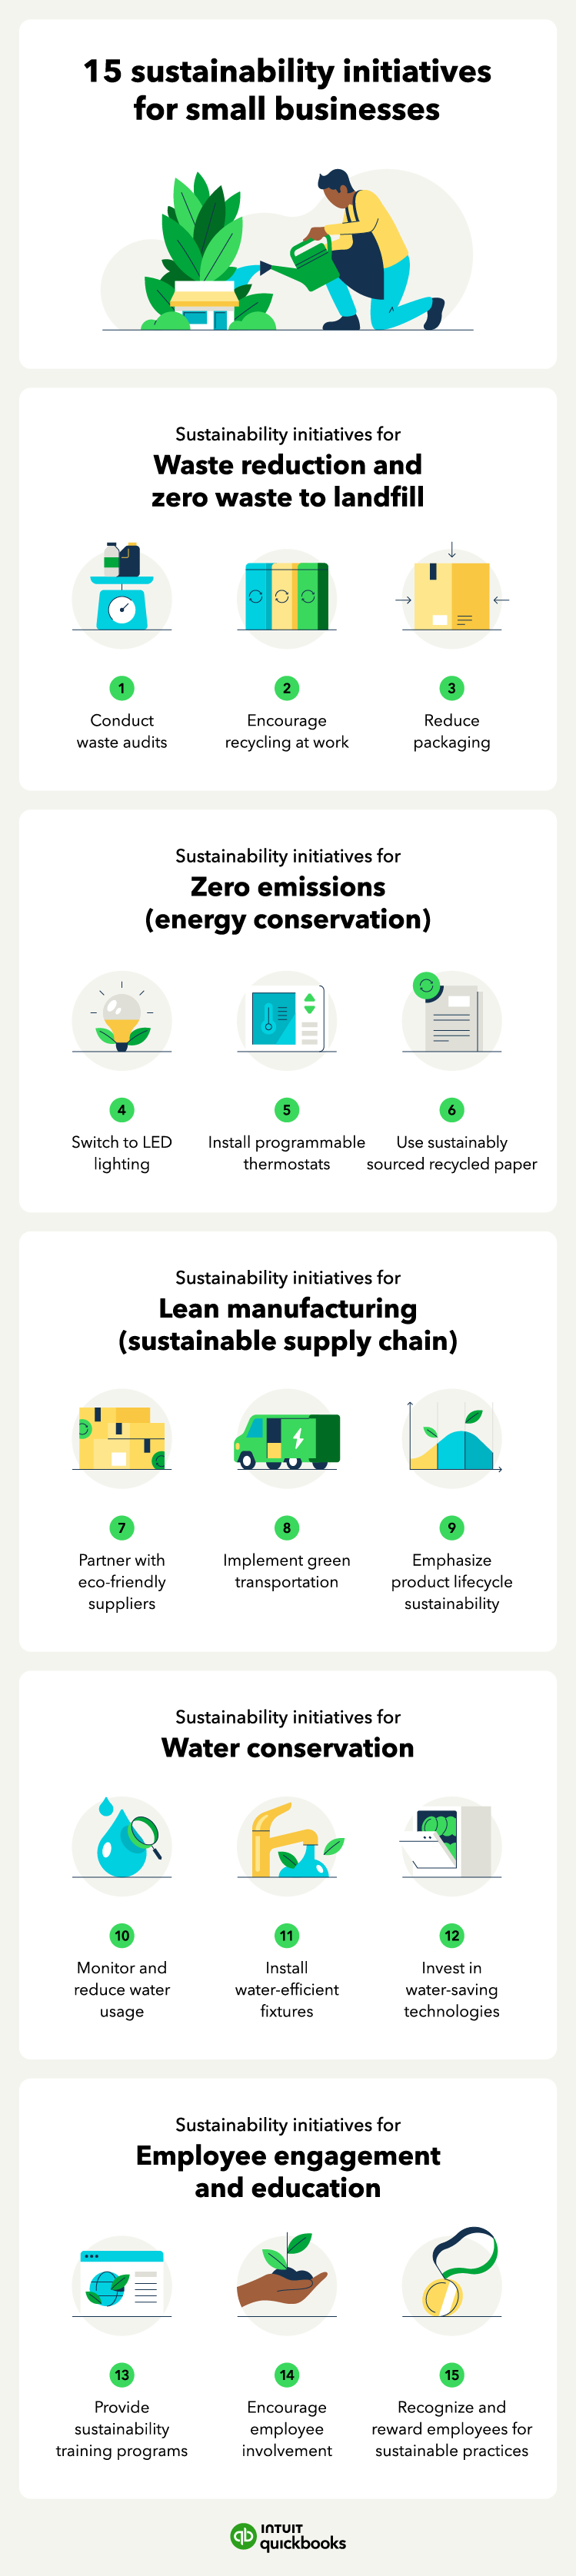 An infographic outlines a list of 15 business sustainability initiatives for small businesses to consider.